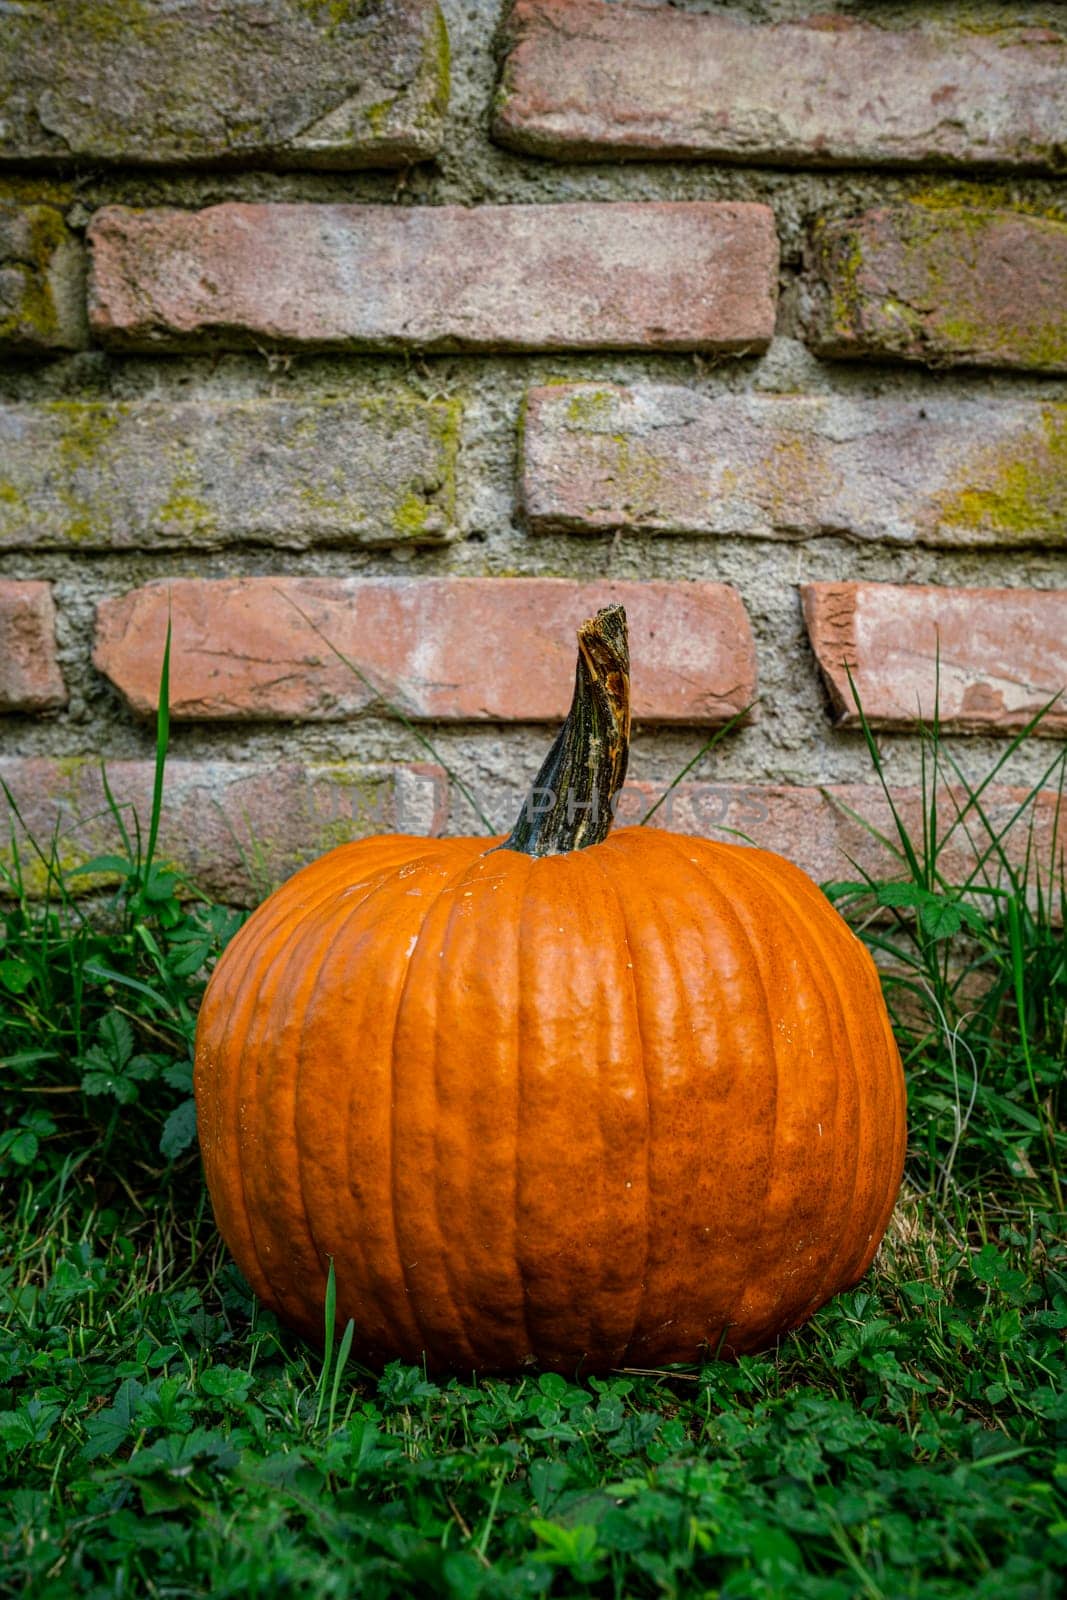 Ripe pumpkin on a green lawn leaning against a brick wall in autumn time